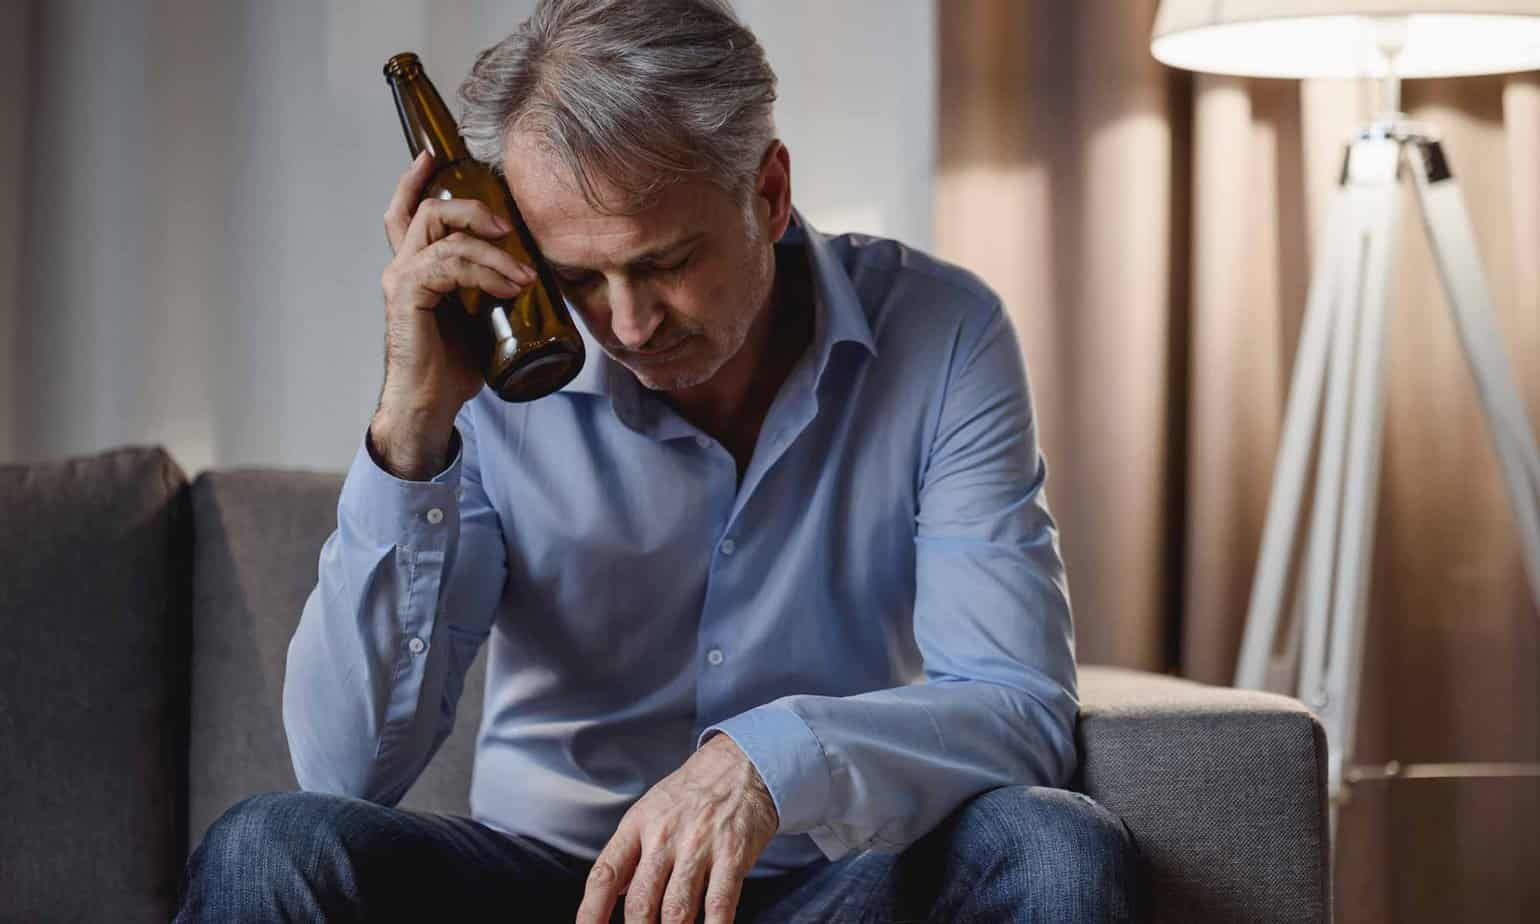 The Elephant in the Room: When Your Father is an Alcoholic